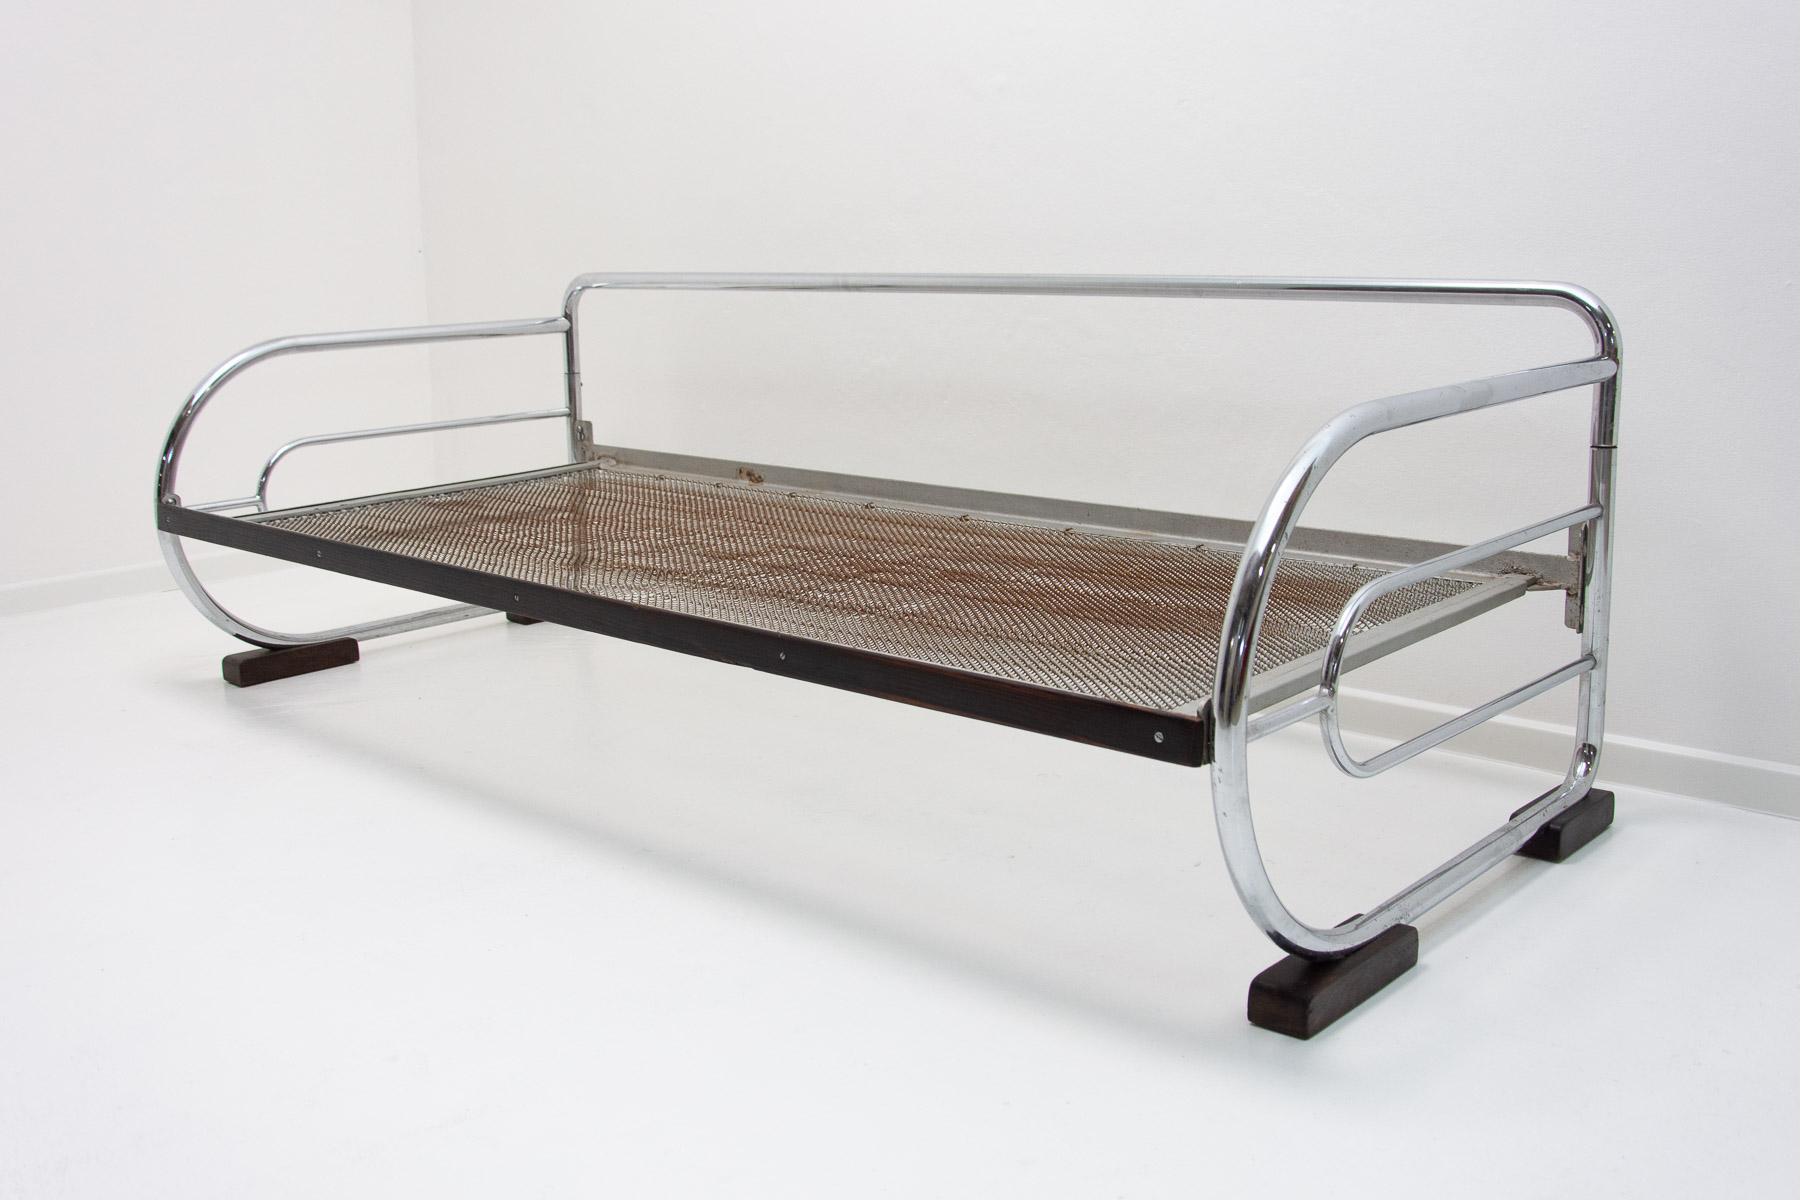 Chromed, tubular steel sofa from the Bauhaus period, 1930s, Bohemia. Made by Hynek Gottwald company. Chrome is in good vintage condition, the mattresses show signs of age and using.
It has four wooden legs.

Height 63 cm

Length 192 cm

Depth